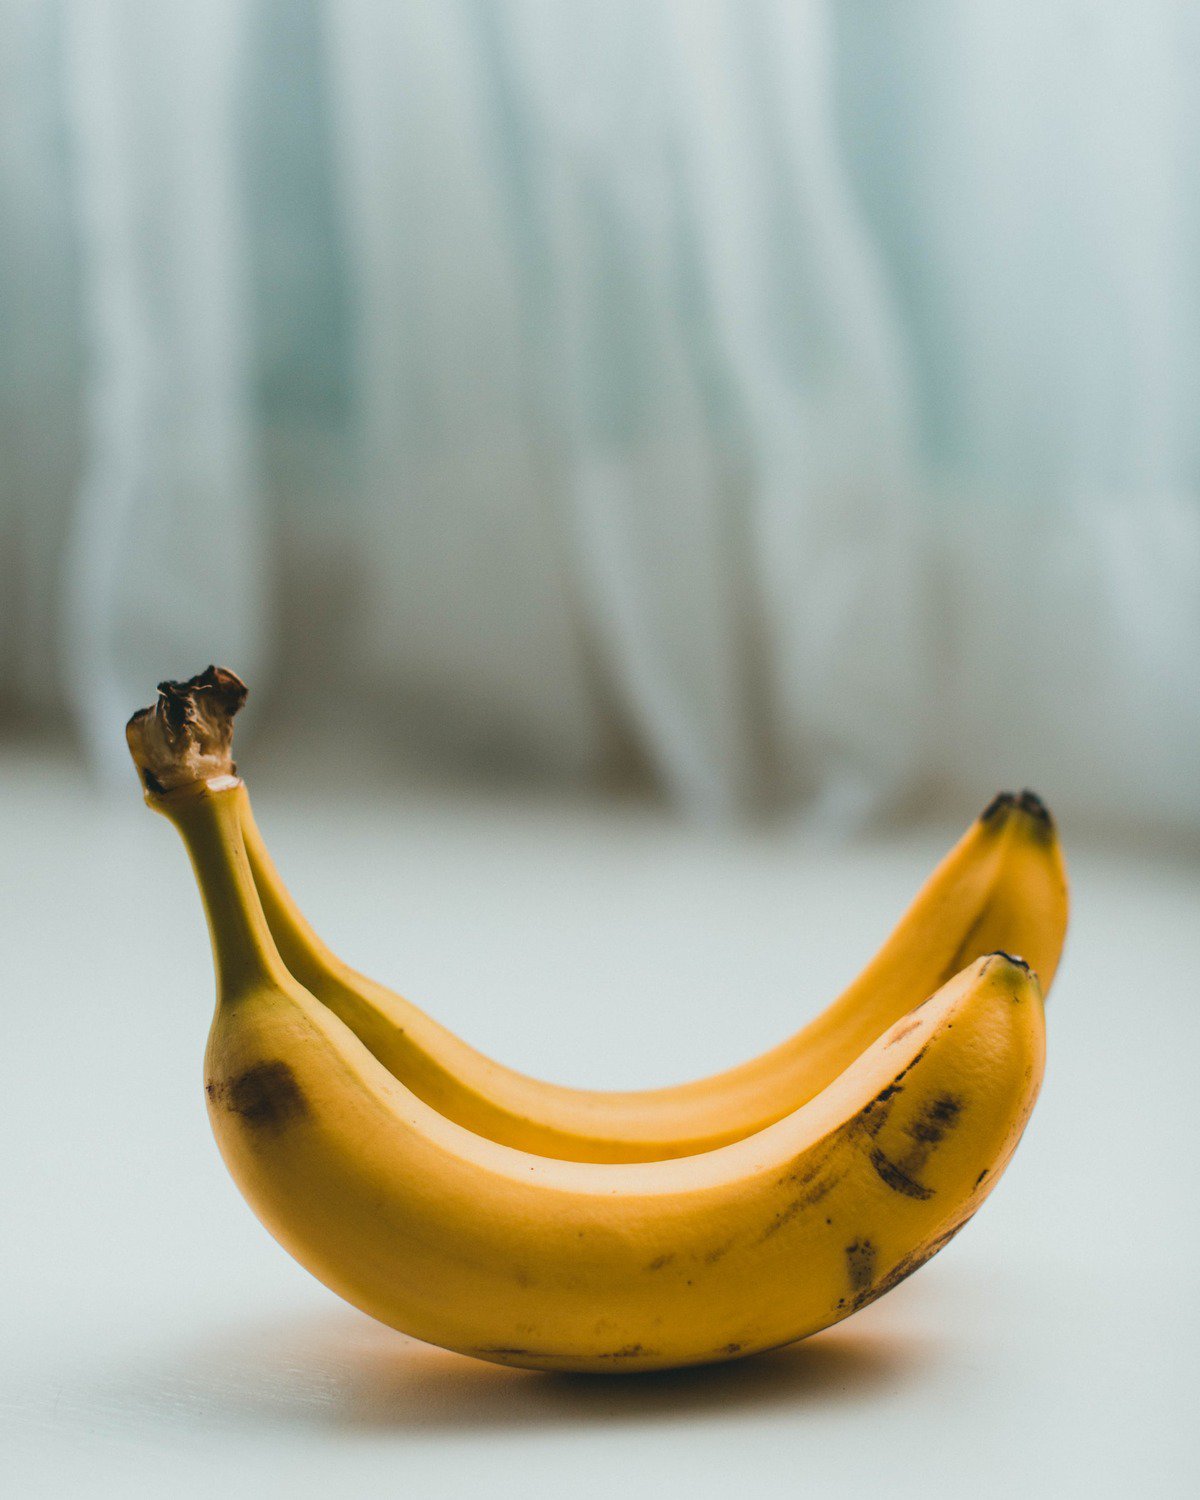 What Do Bananas Taste Like? Are They Sweet, Sour, or Bland?